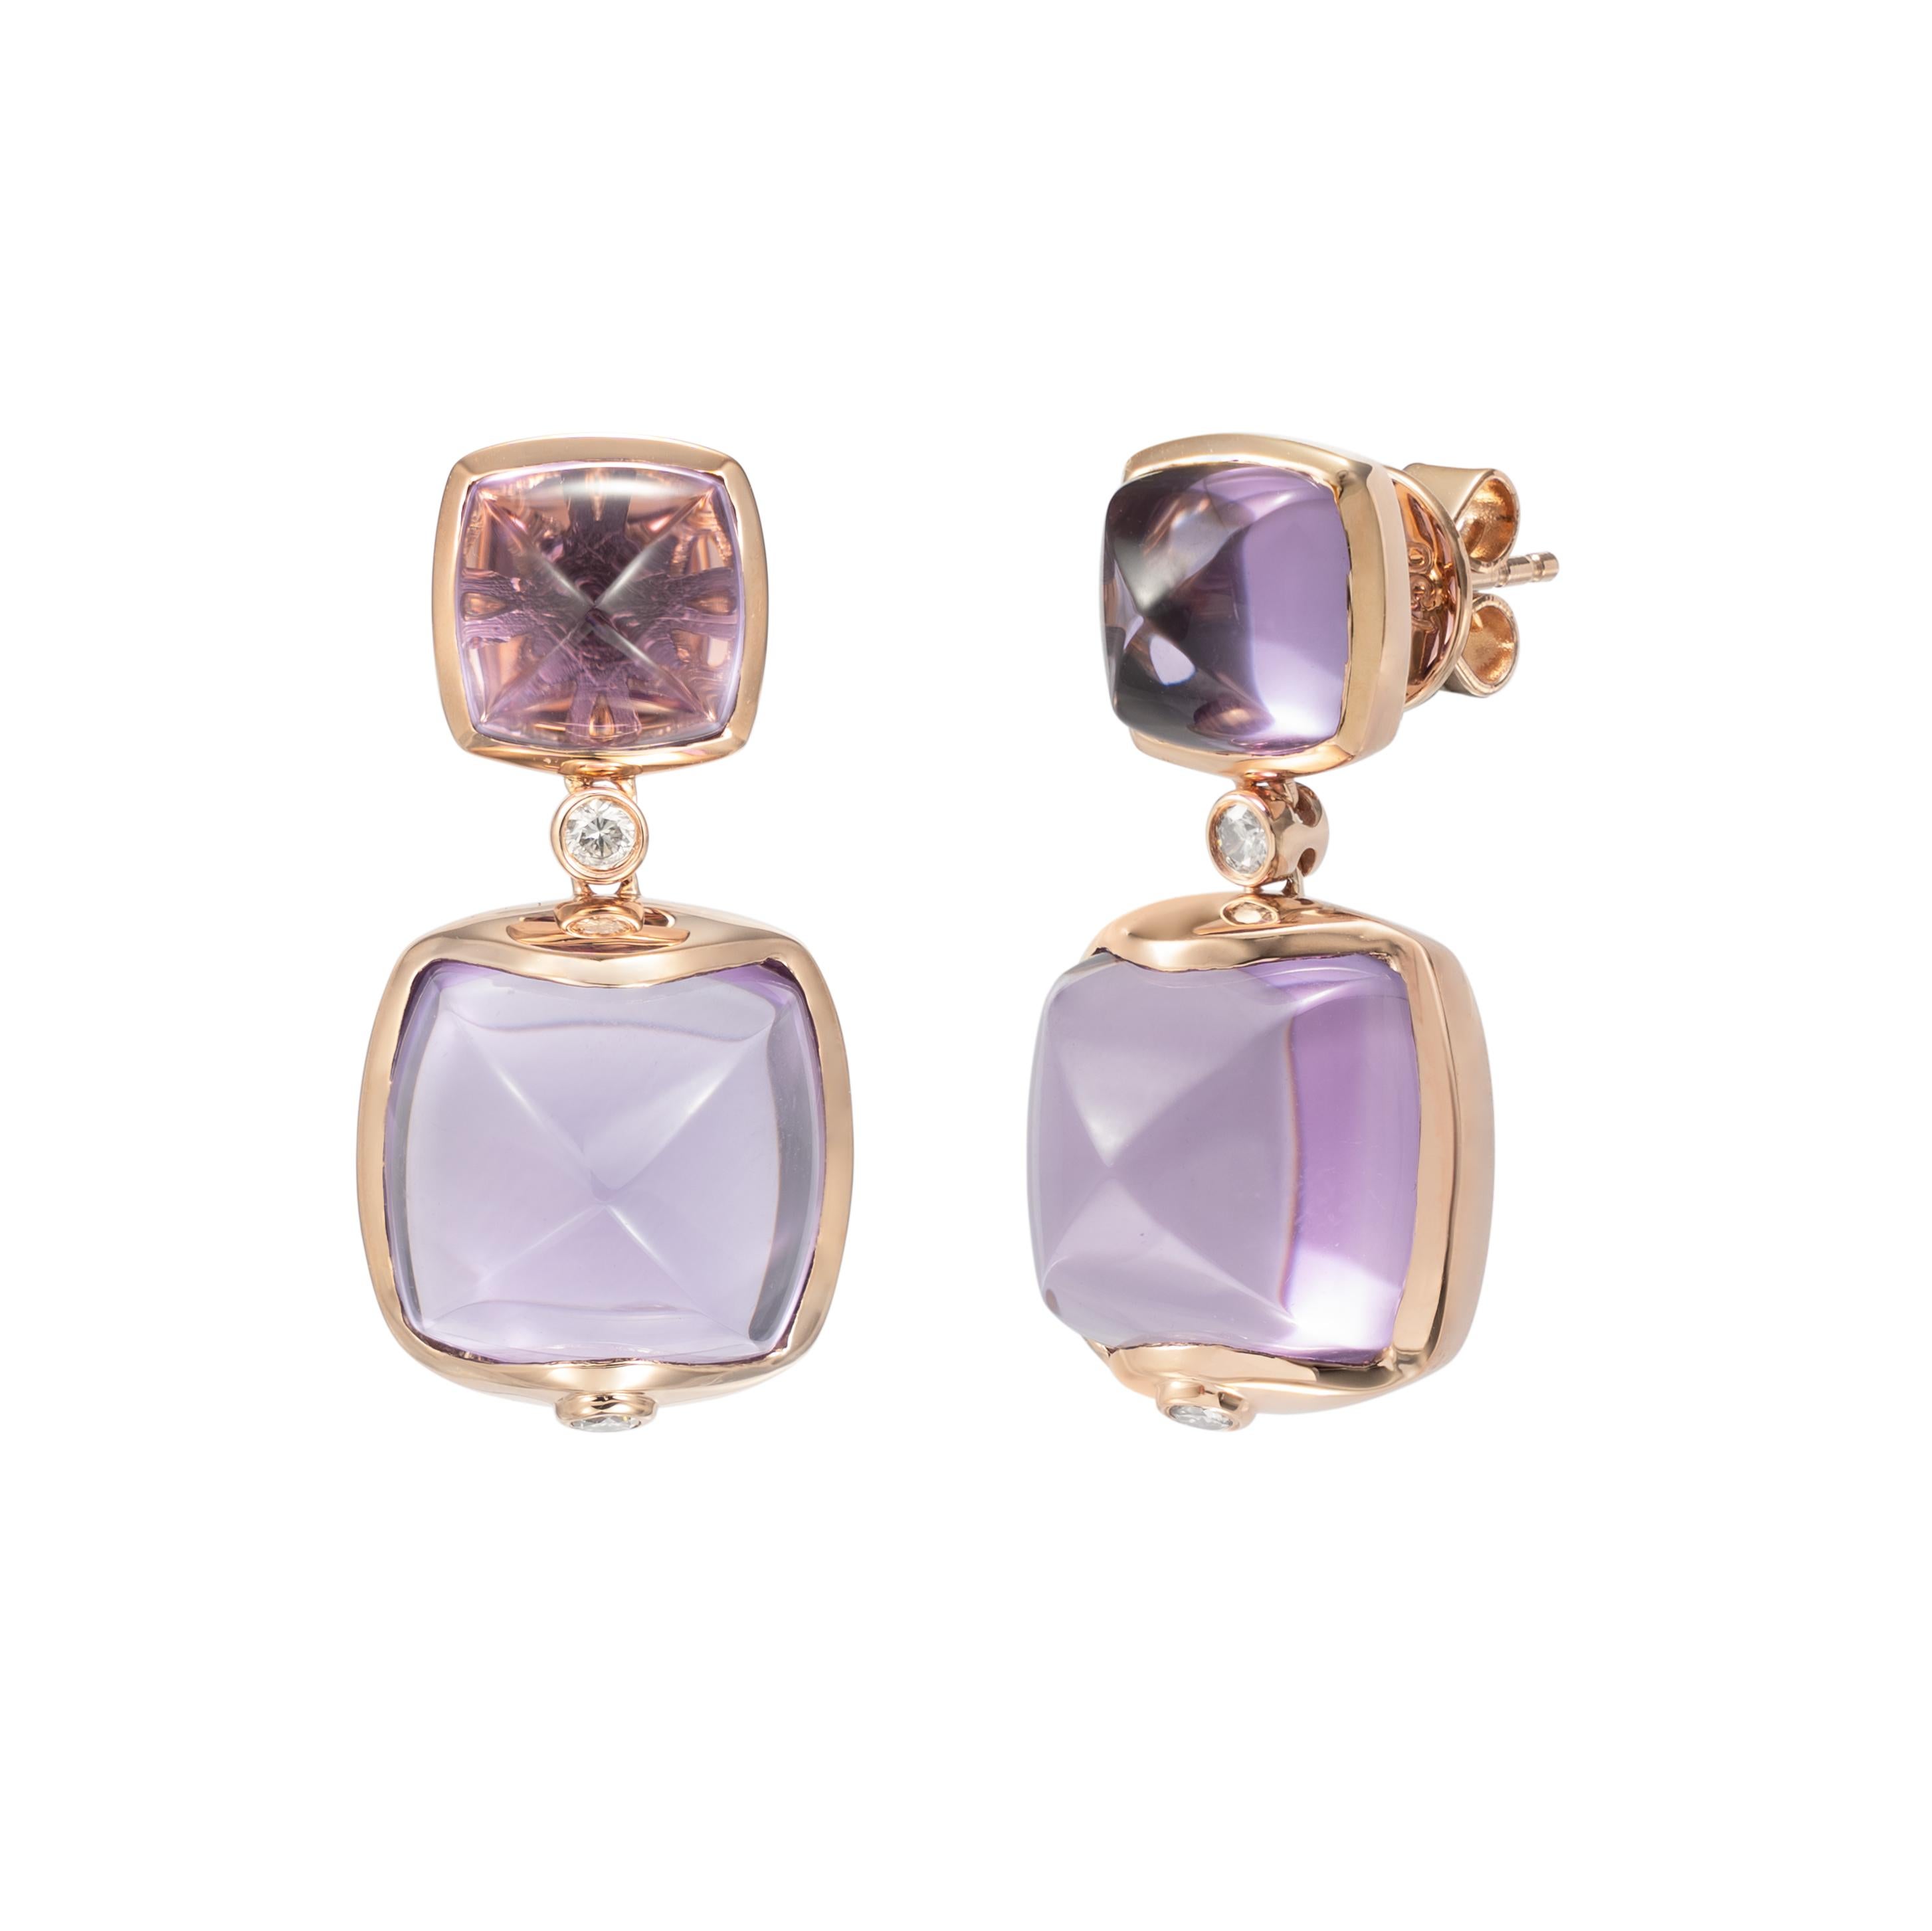 Sweet Sugarloaves! Light and easy to wear these earrings showcase beautiful sugarloaf gemstones accented with a gold frame and diamonds. These earrings are dainty yet have a great pop of color from the vibrant gems.

Amethyst Sugarloaf Earrings with